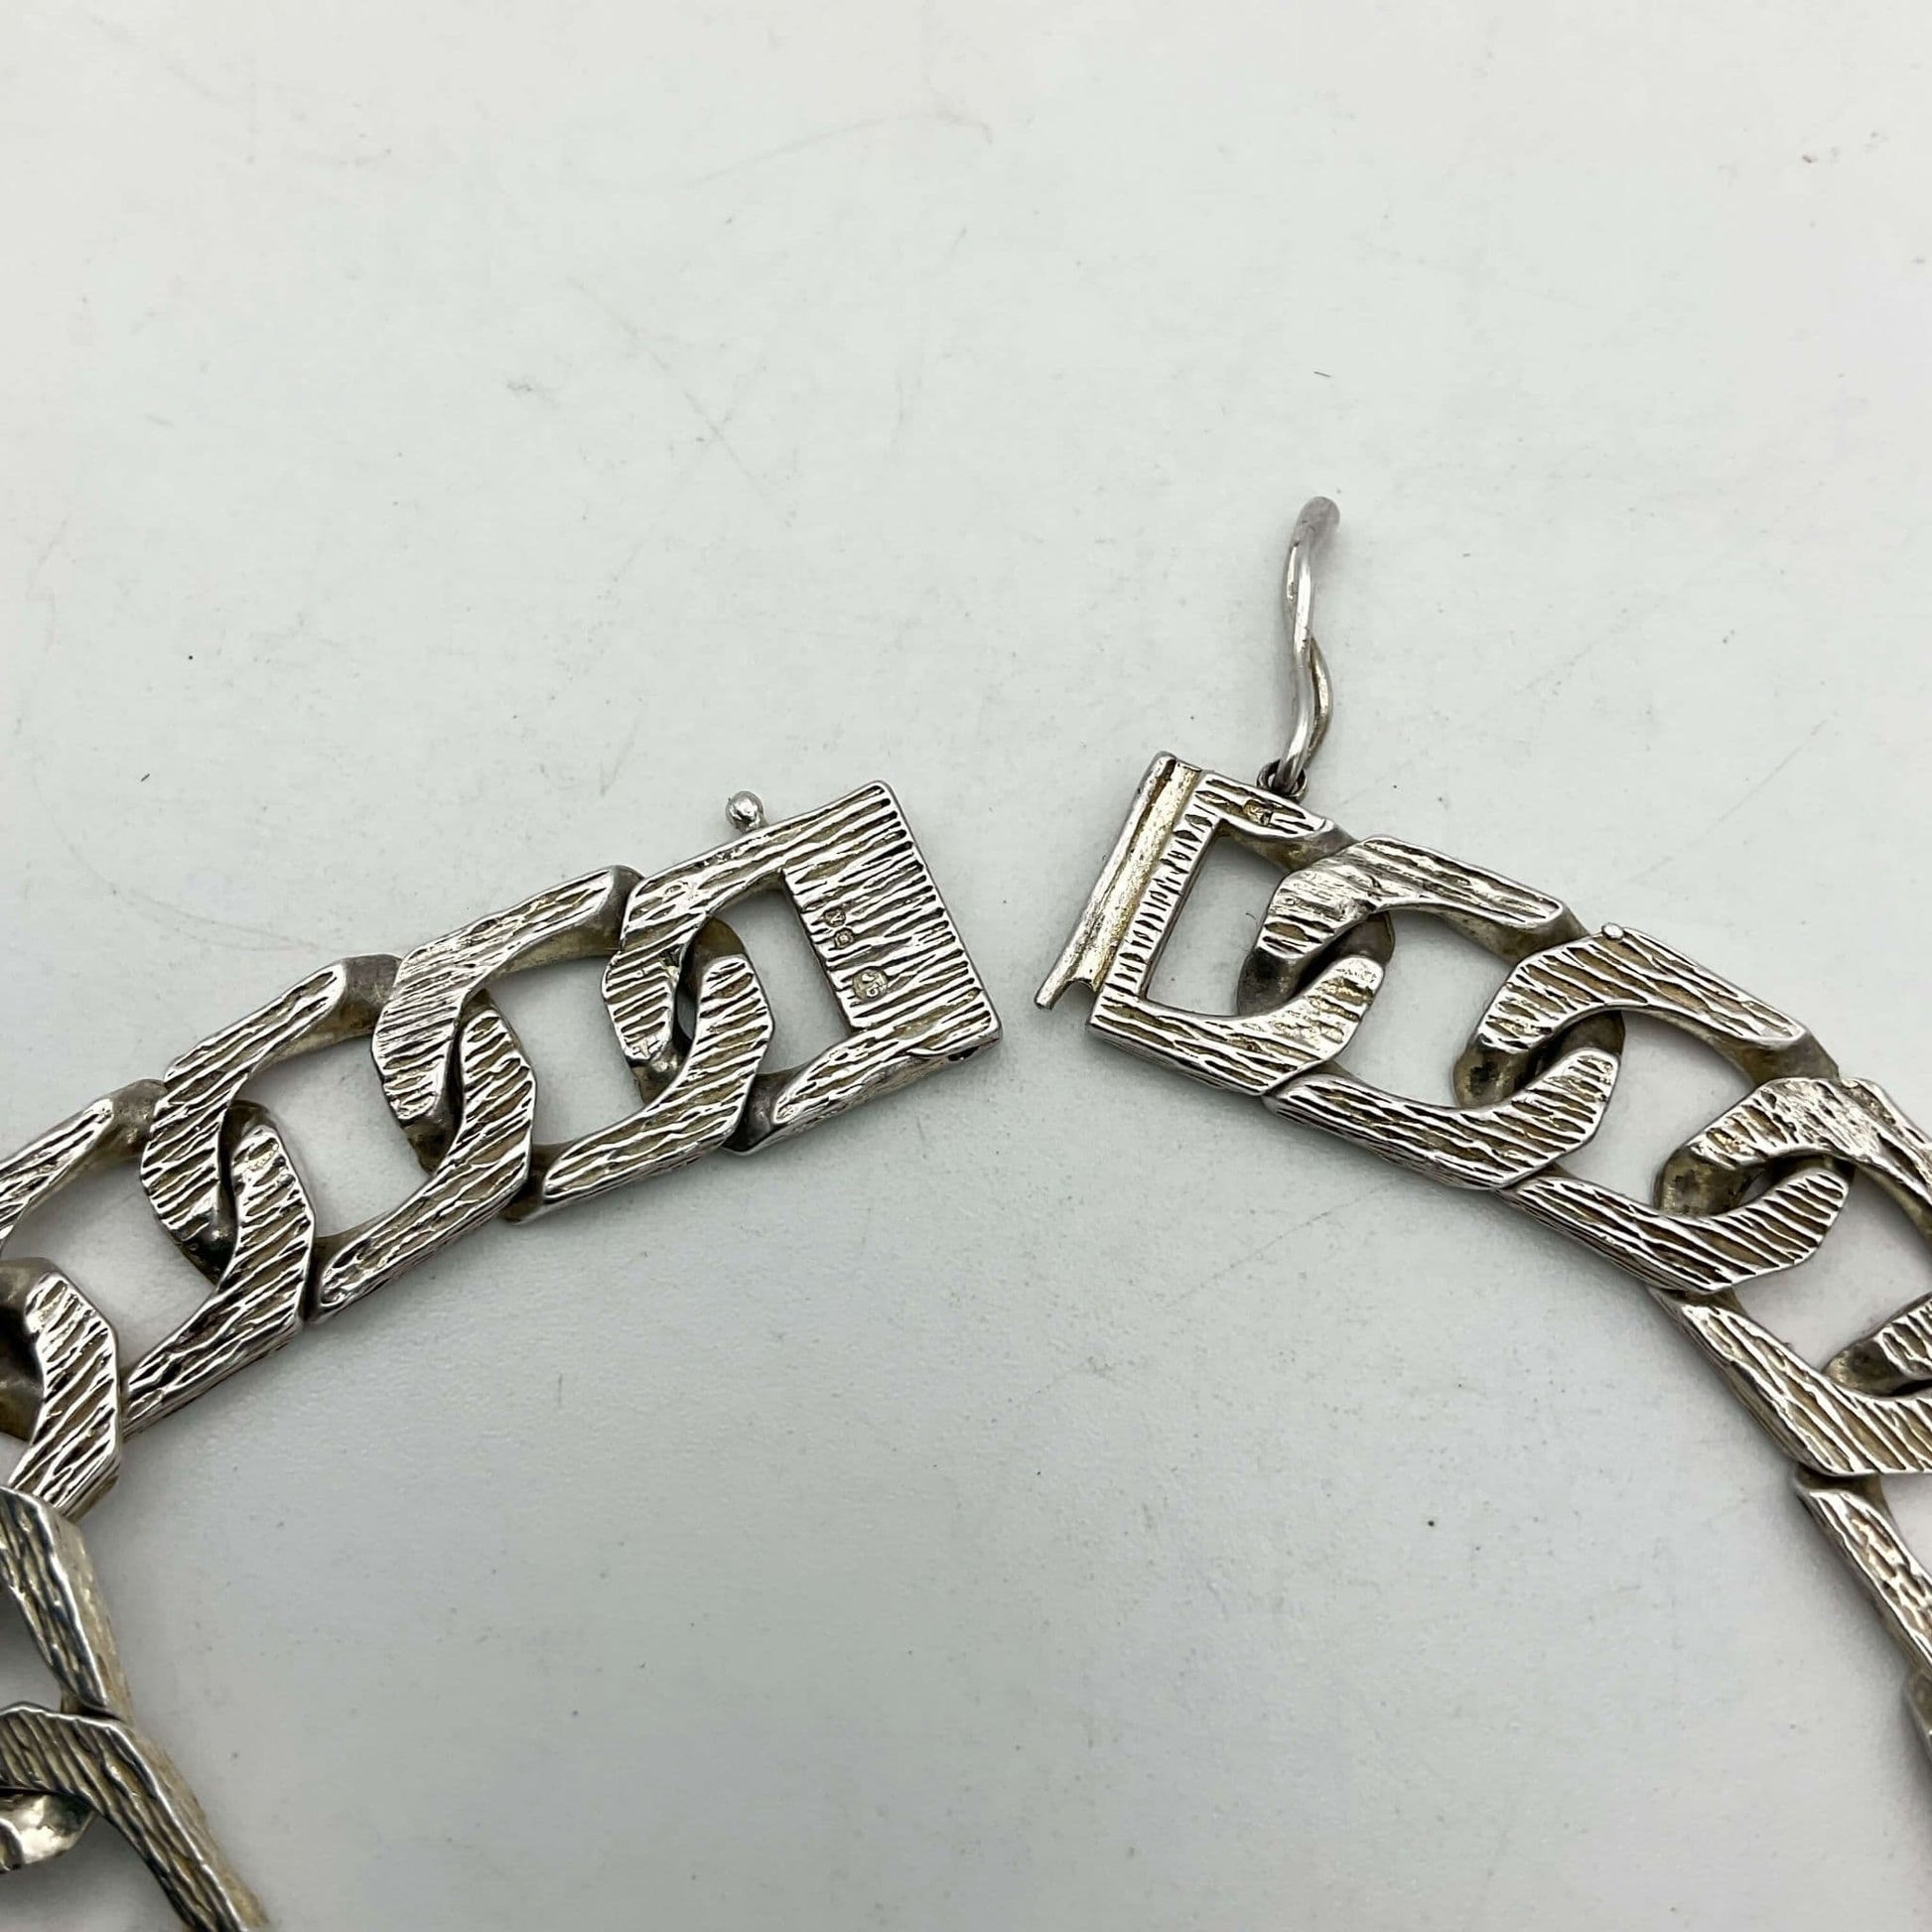 The clasp of the silver chain bracelet lying flat on a white background